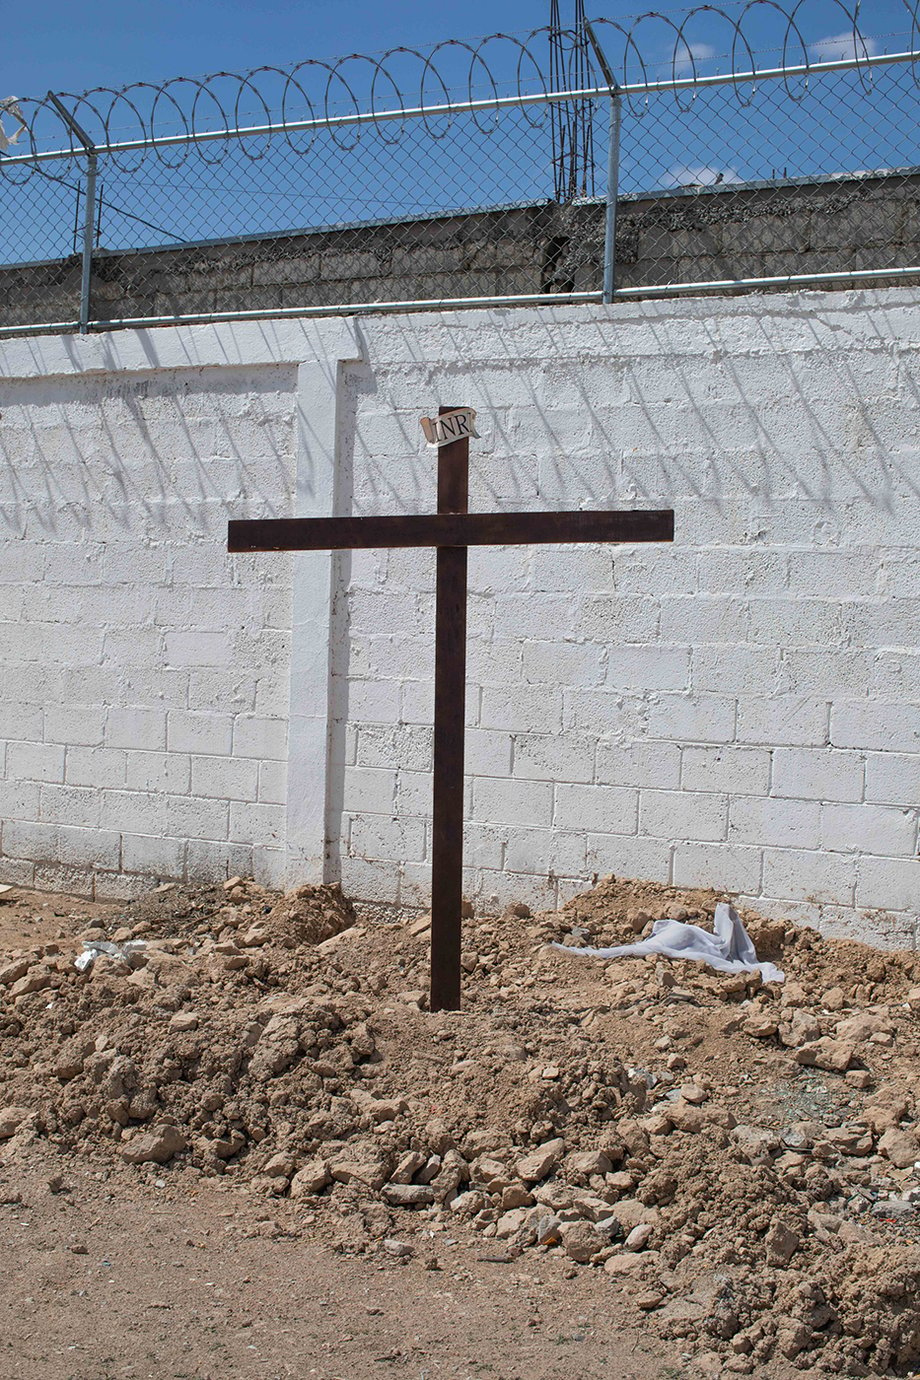 Cross at a local Juarez shelter run by Pastor Hector Trejo shot by Lisette Poole for National Geographic Magazine